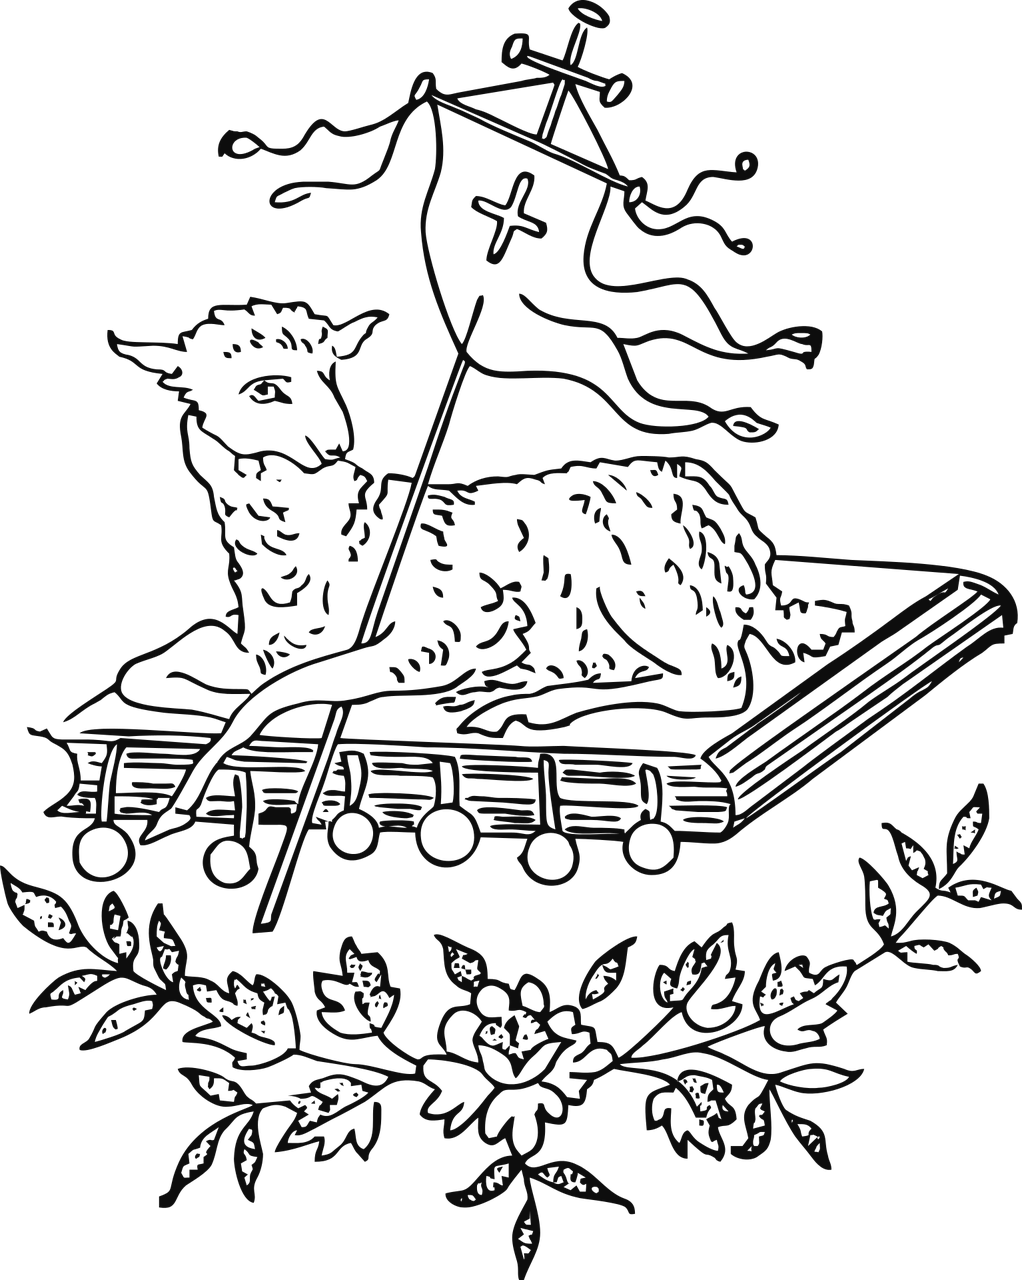 a black and white drawing of a cat on a book, an engraving, inspired by Ștefan Luchian, sots art, lamb and goat fused as one, coat of arms, iphone background, main colour - black